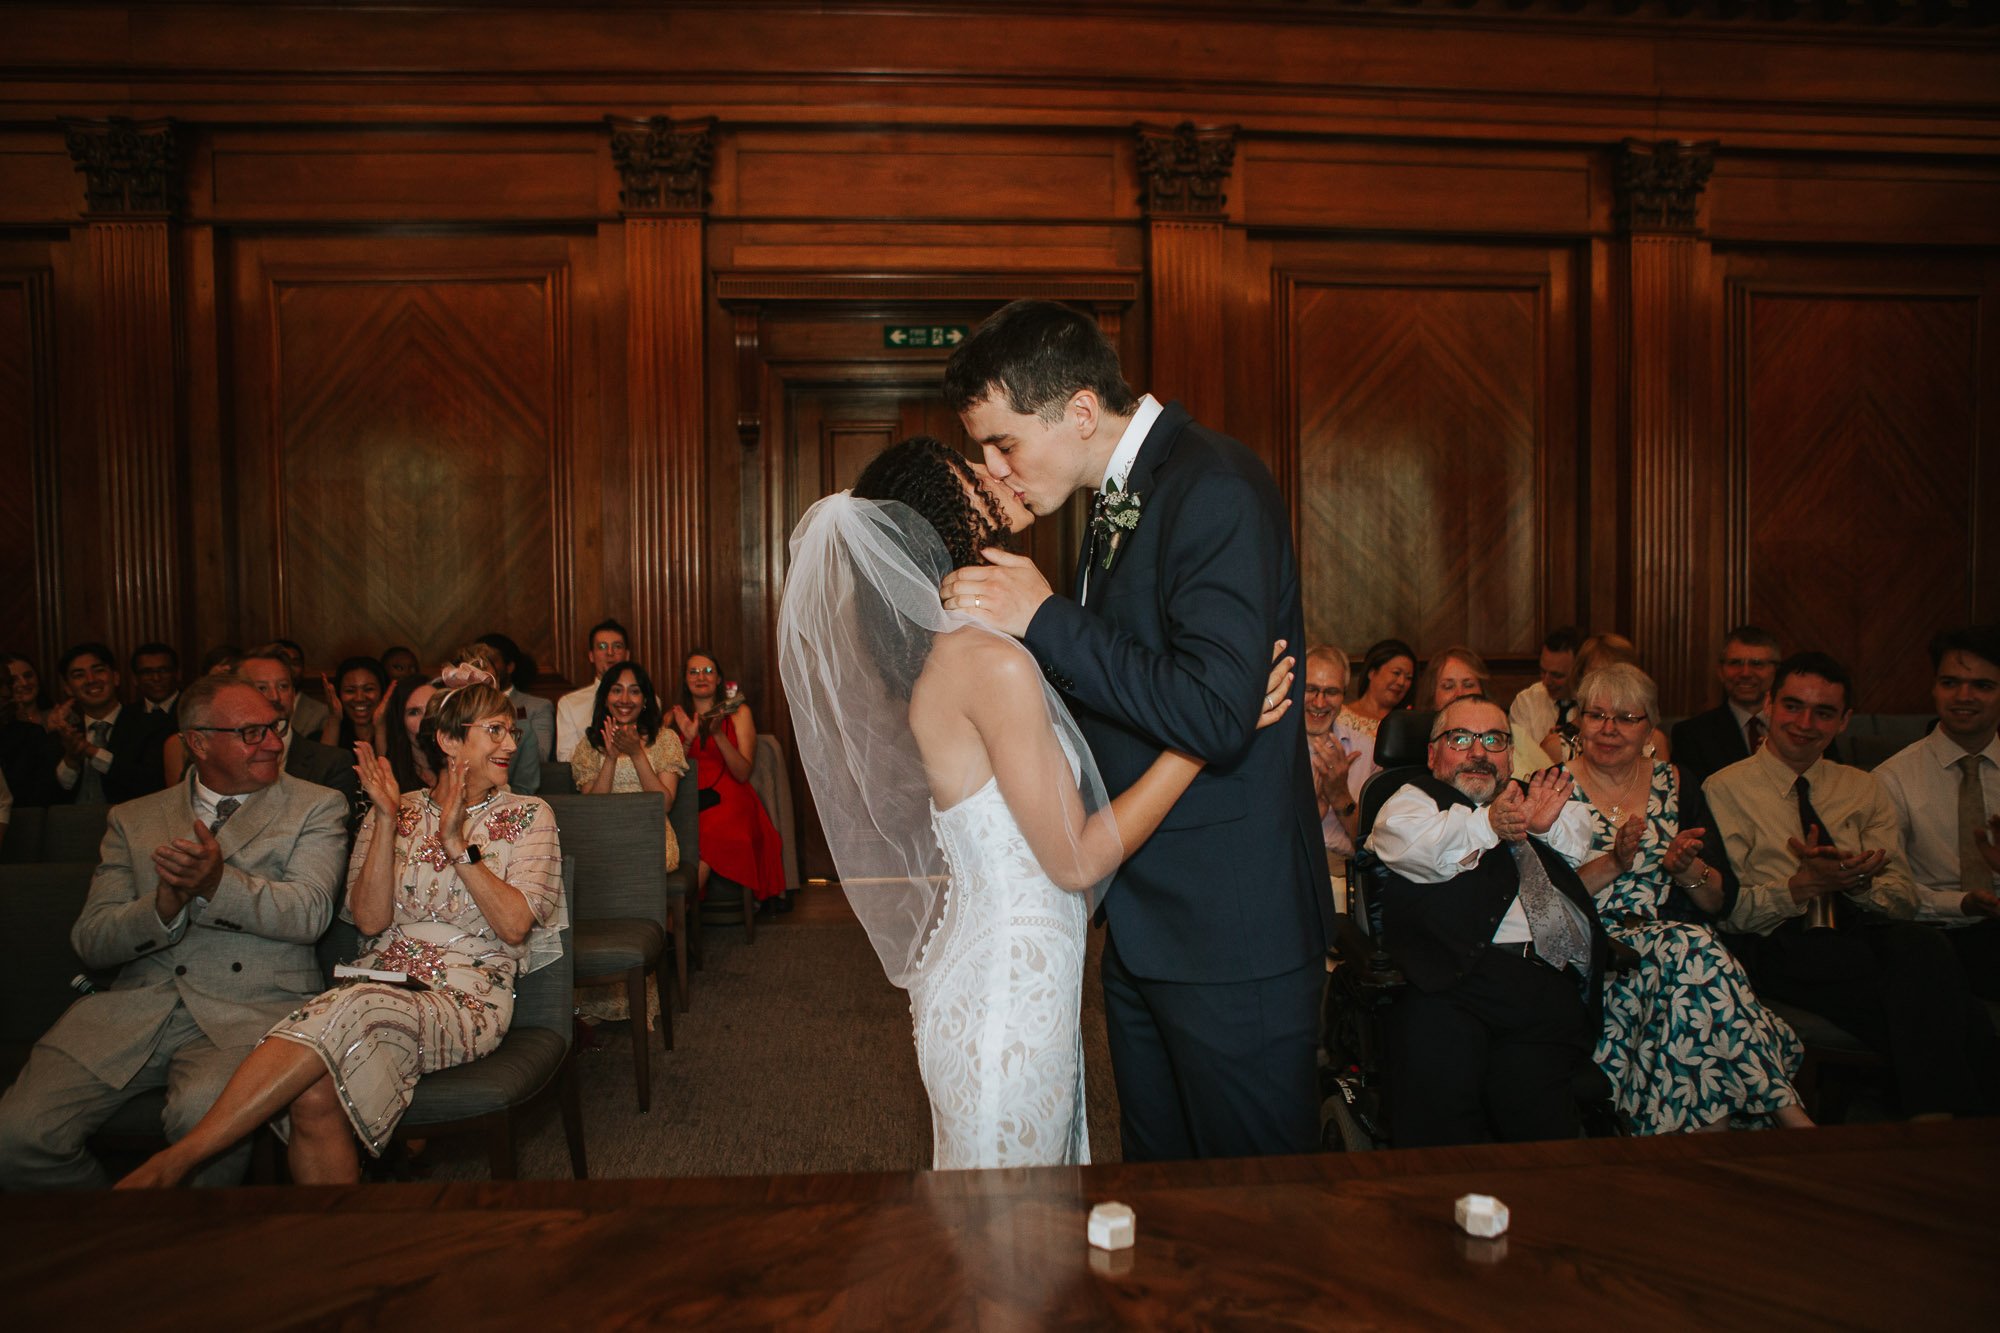  The bride and groom kissing after being pronounced man and wife in the Westminster room at Marylebone town hall in Marylebone, London. 